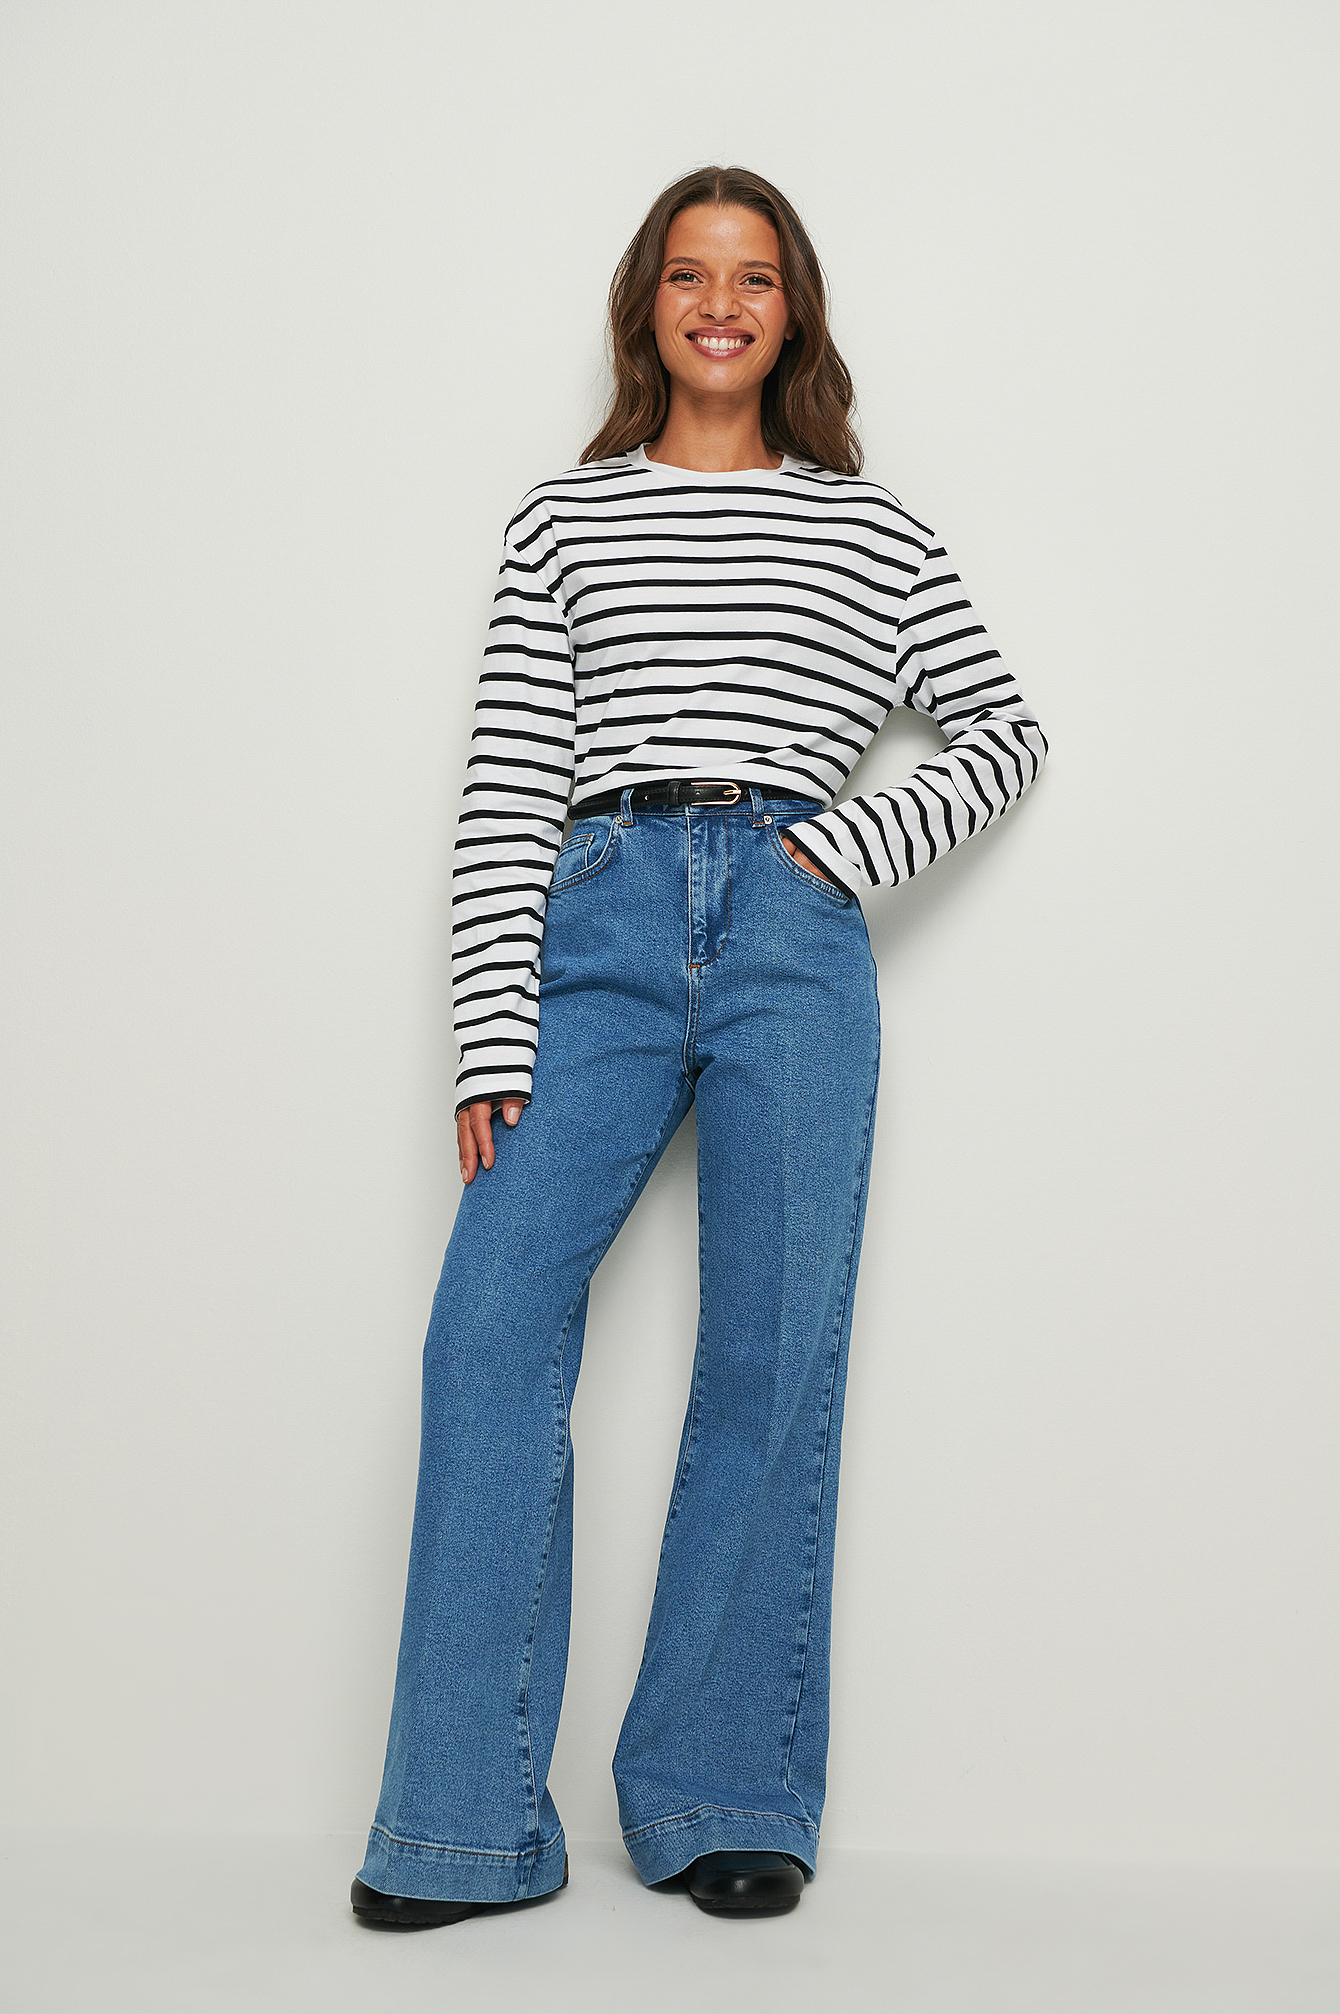 70s Wide Leg Jeans Outfit